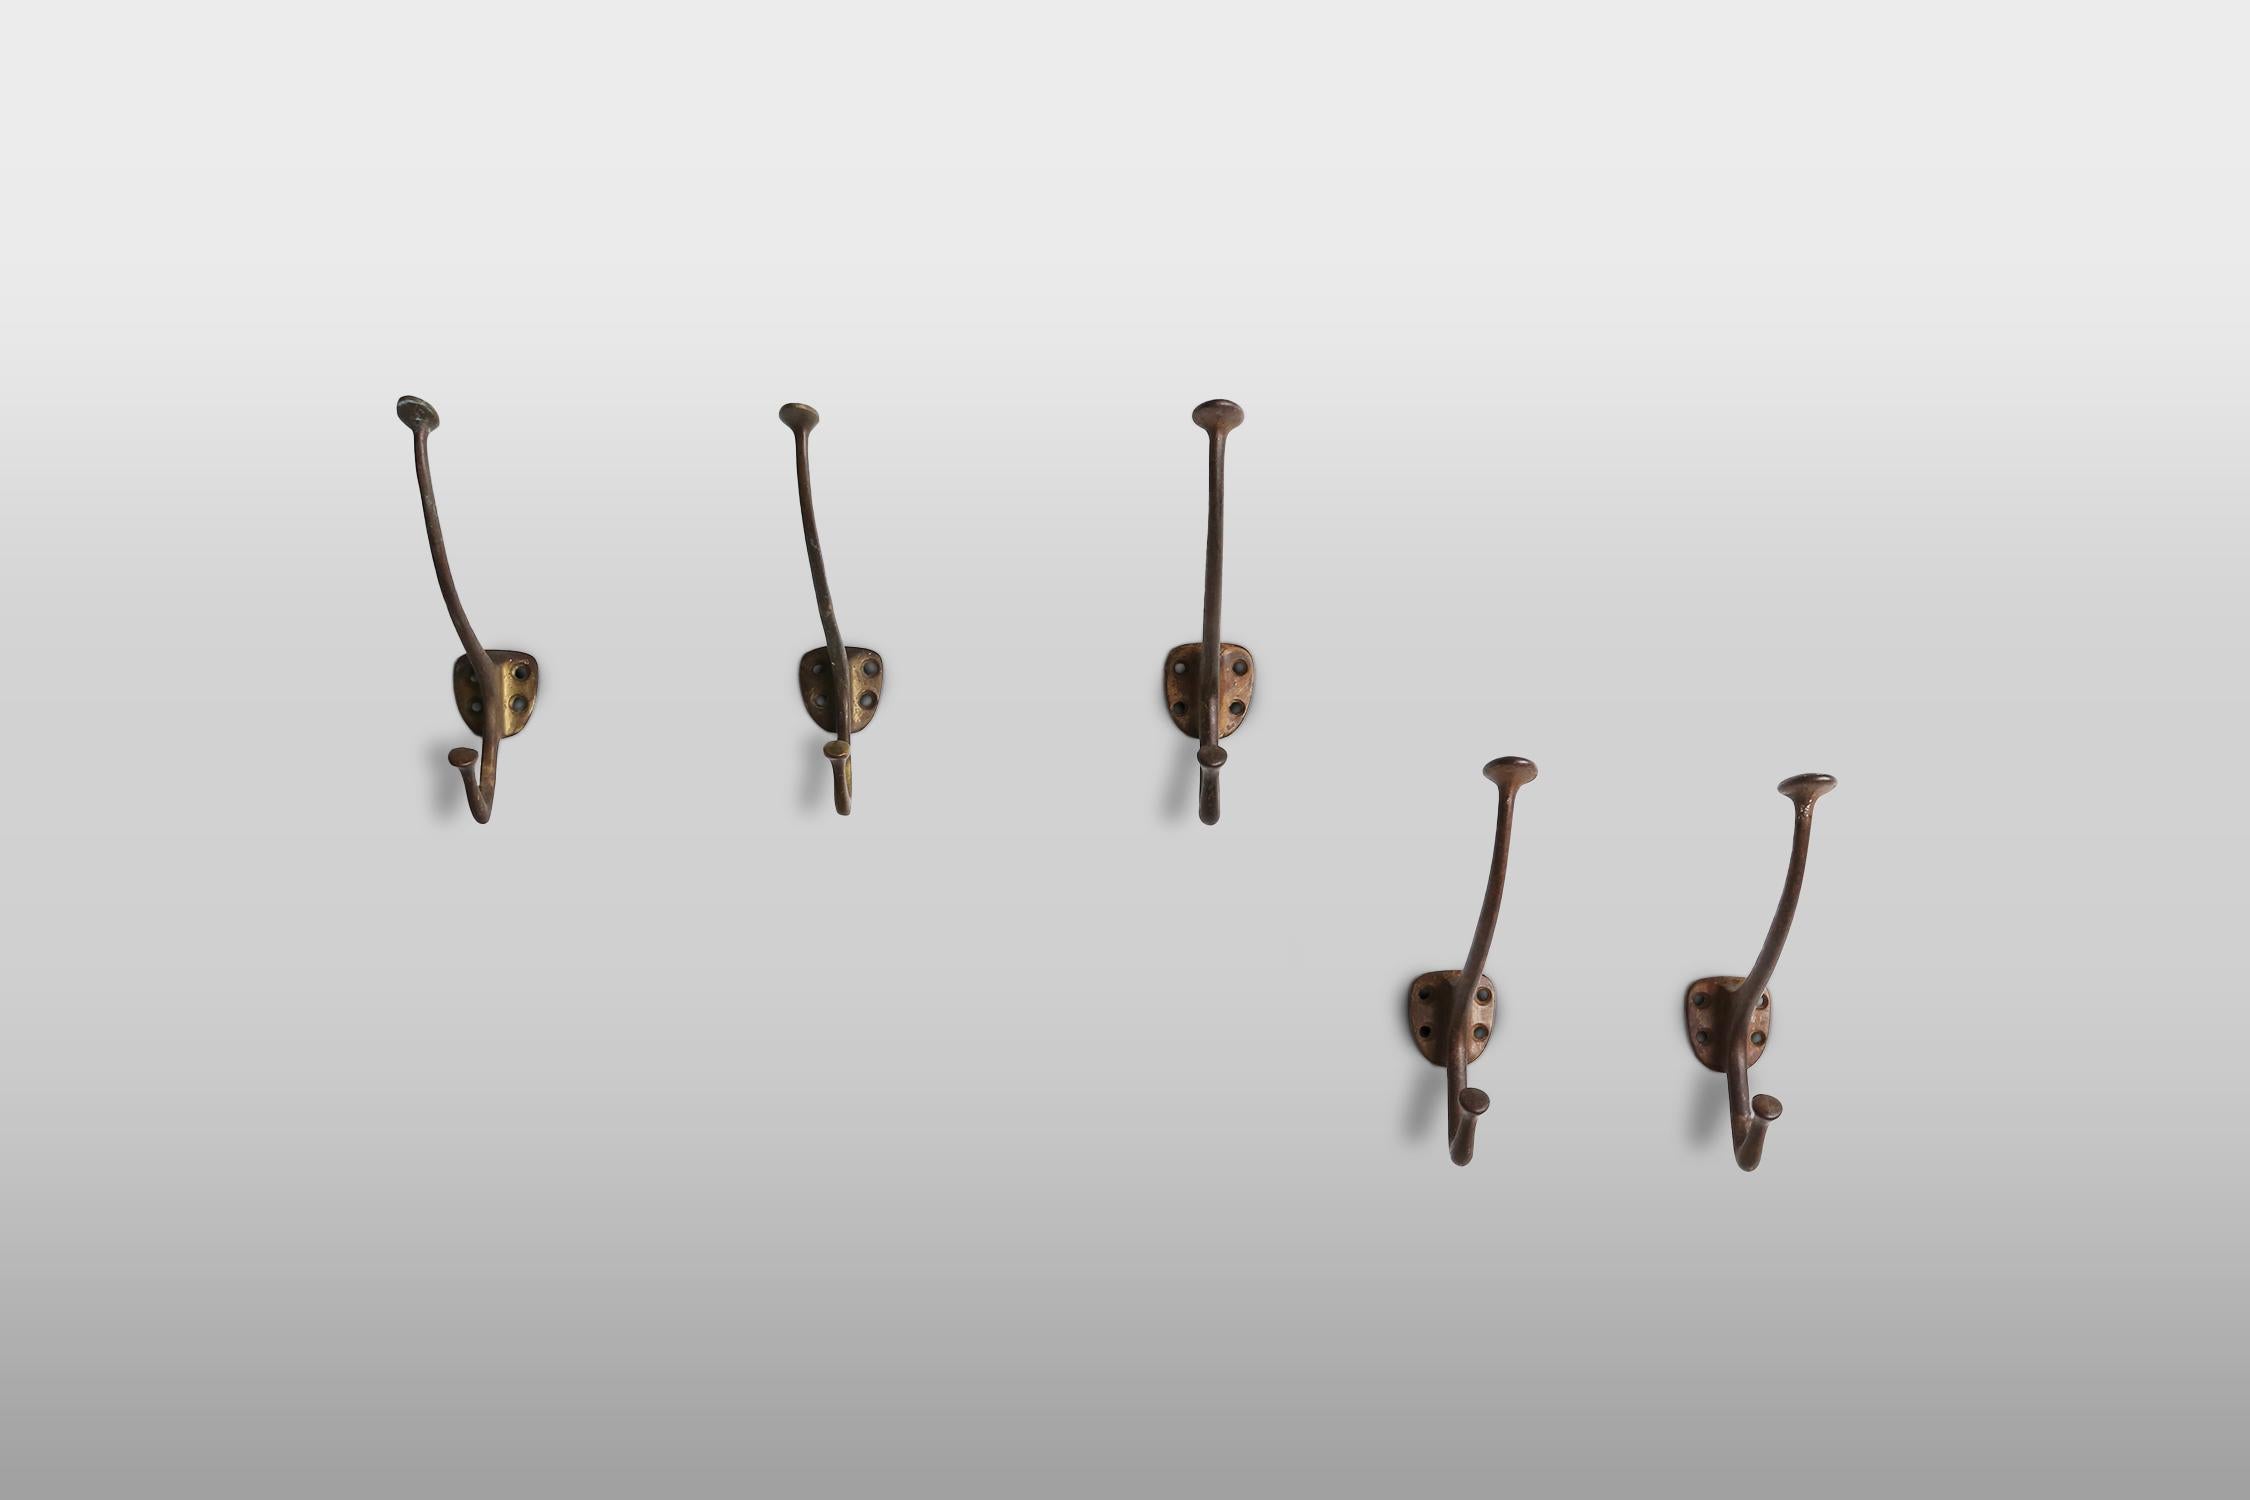 Austria / 1916 / Adolf Loos /  wall hooks / brass / Jugenstil / art deco

Set of 6 beautiful and elegantly curved Jugendstil wall hooks in brass, designed by Adolf Loos (1870 - 1933) for the Cafe Capua Vienna 1916.
A forerunner of the International